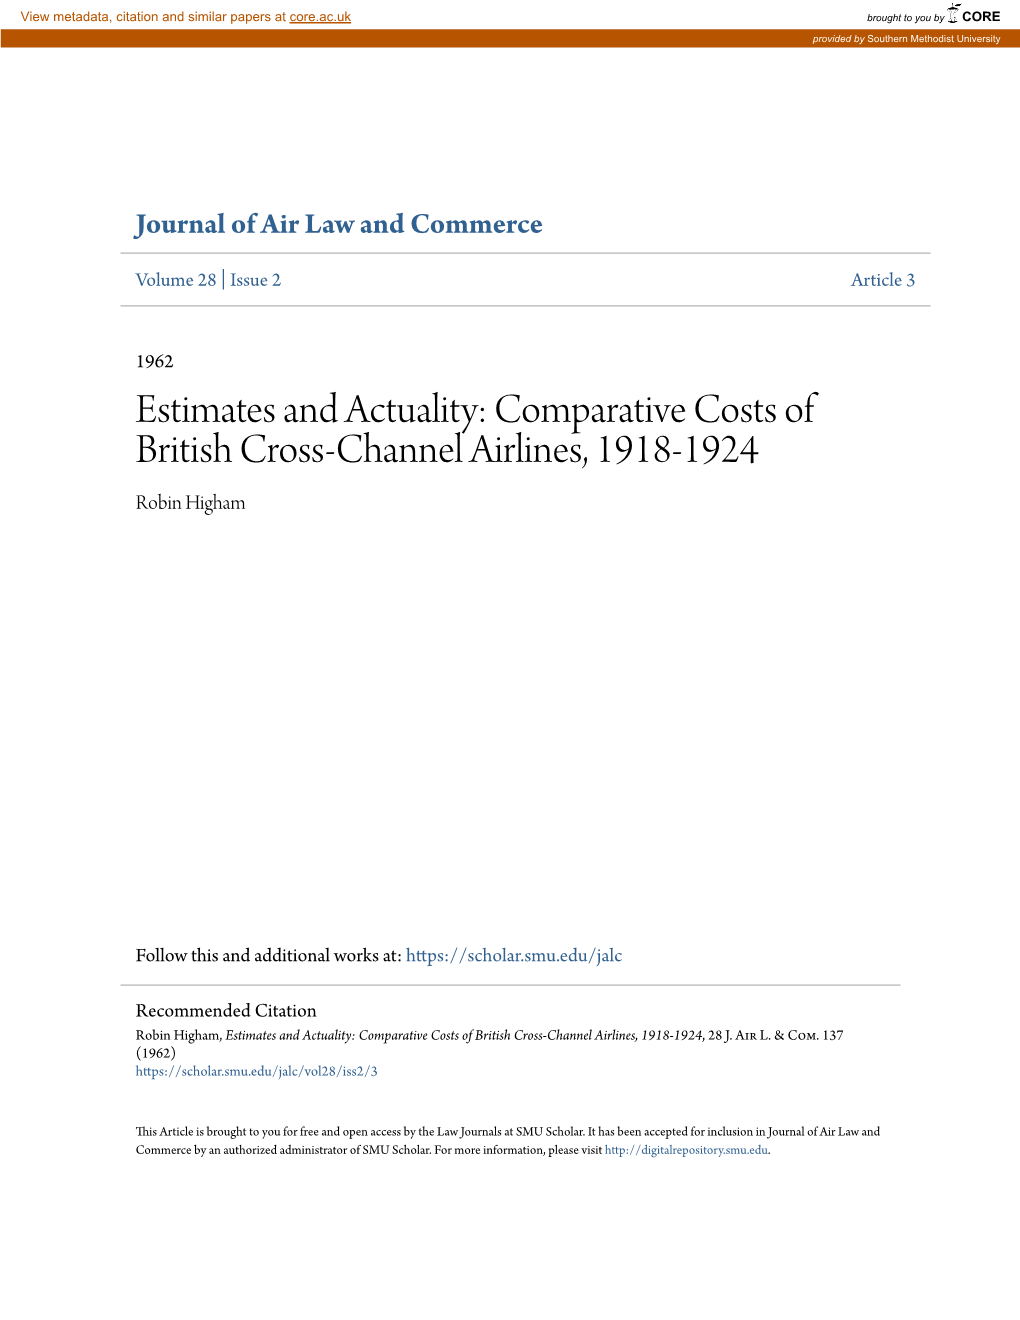 Comparative Costs of British Cross-Channel Airlines, 1918-1924 Robin Higham